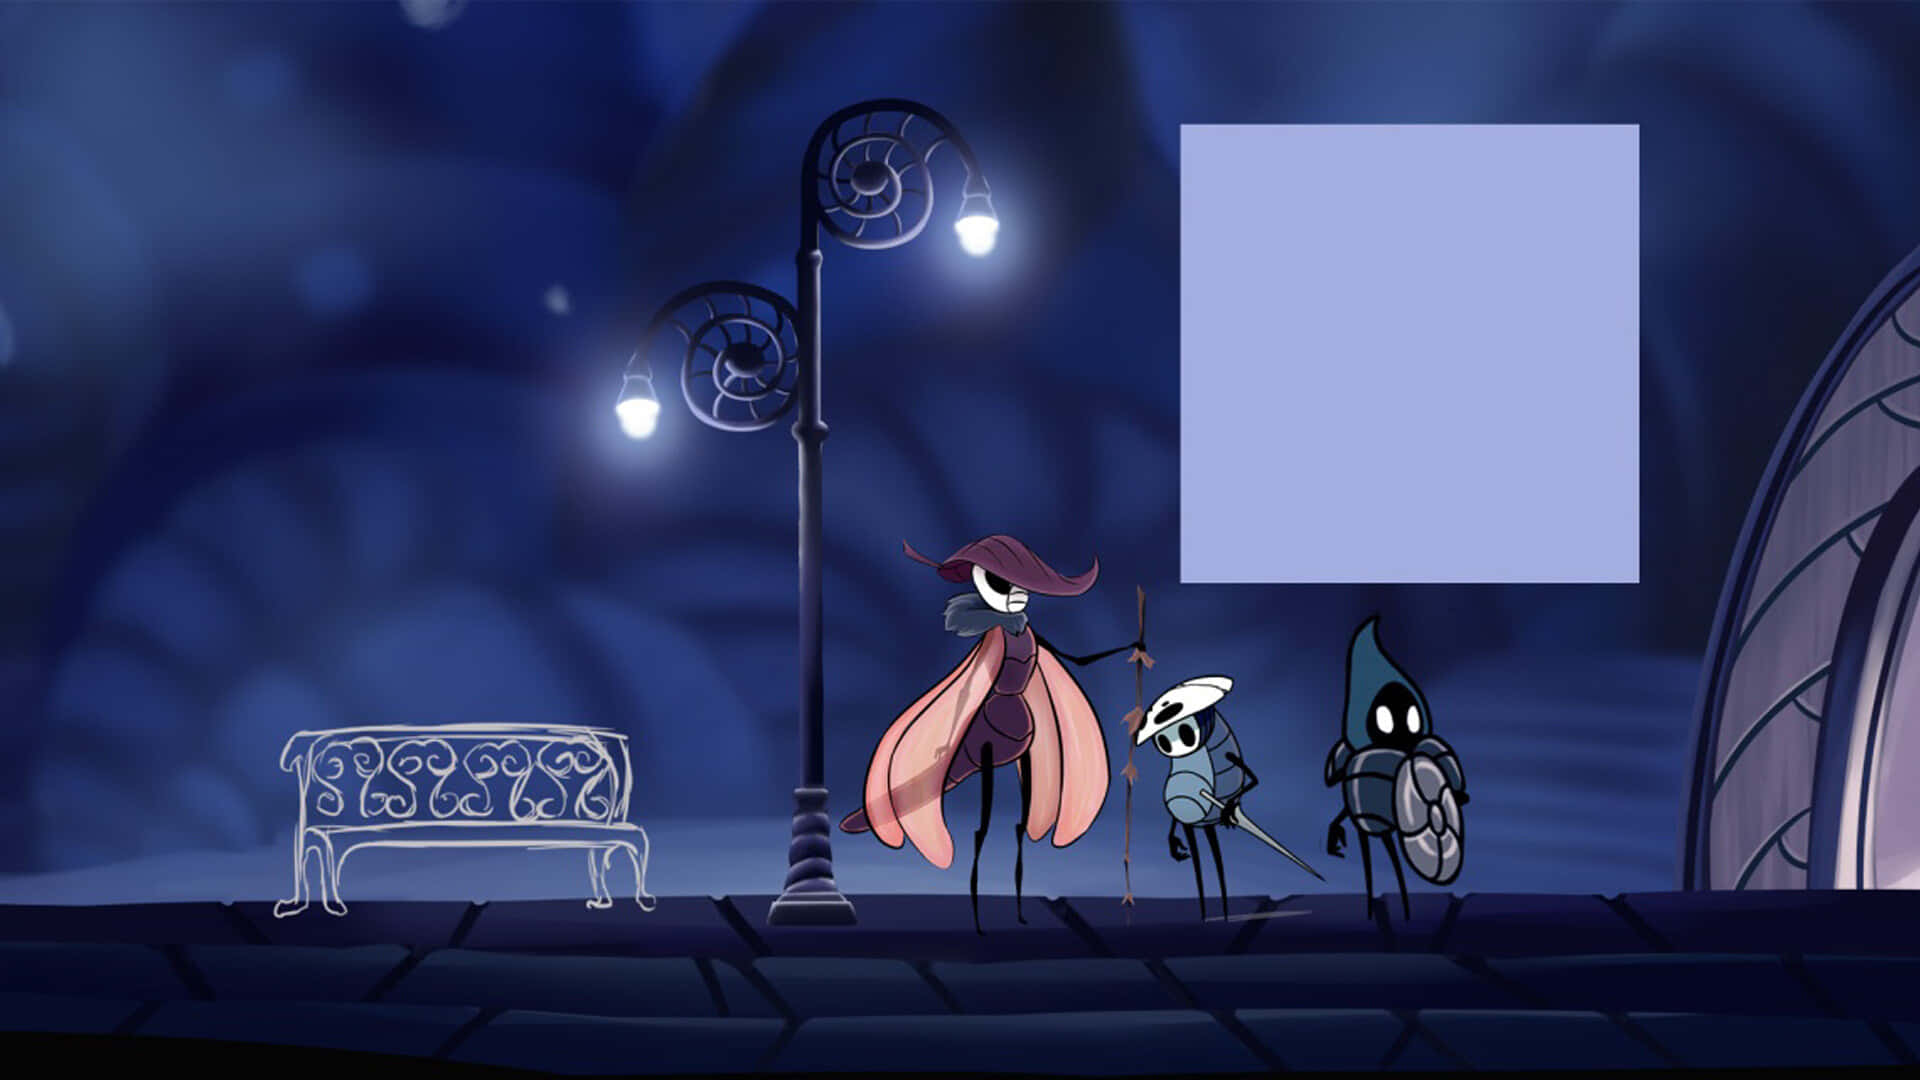 Explore the ancient and mysterious world of Hallownest in Hollow Knight